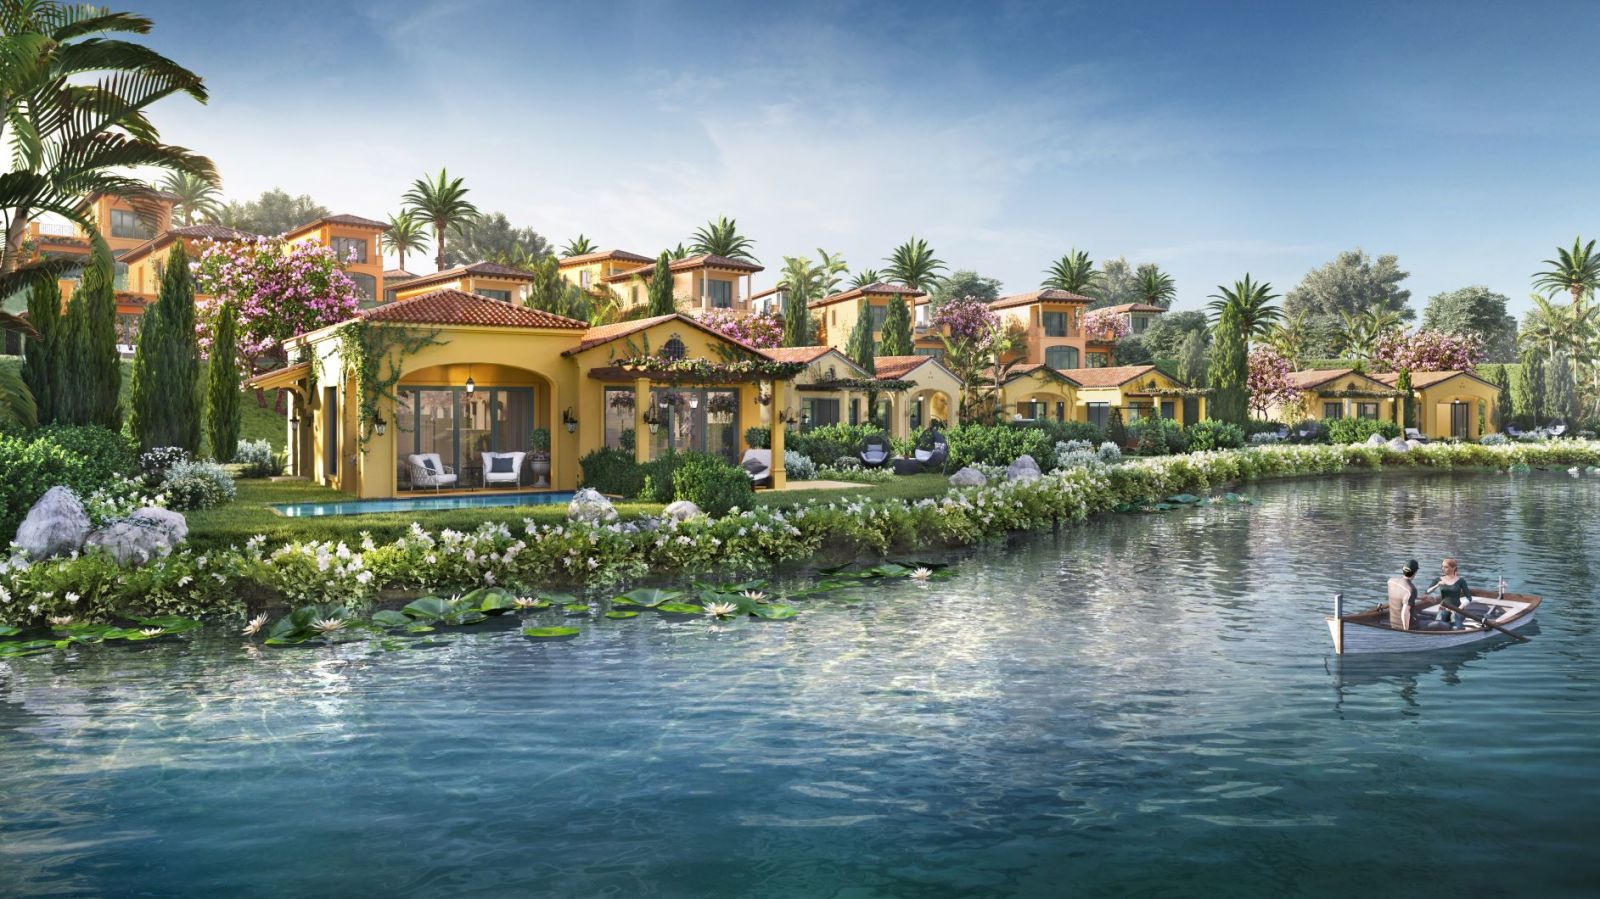 Villas of the project are designed in the Spanish renaissance architecture style.